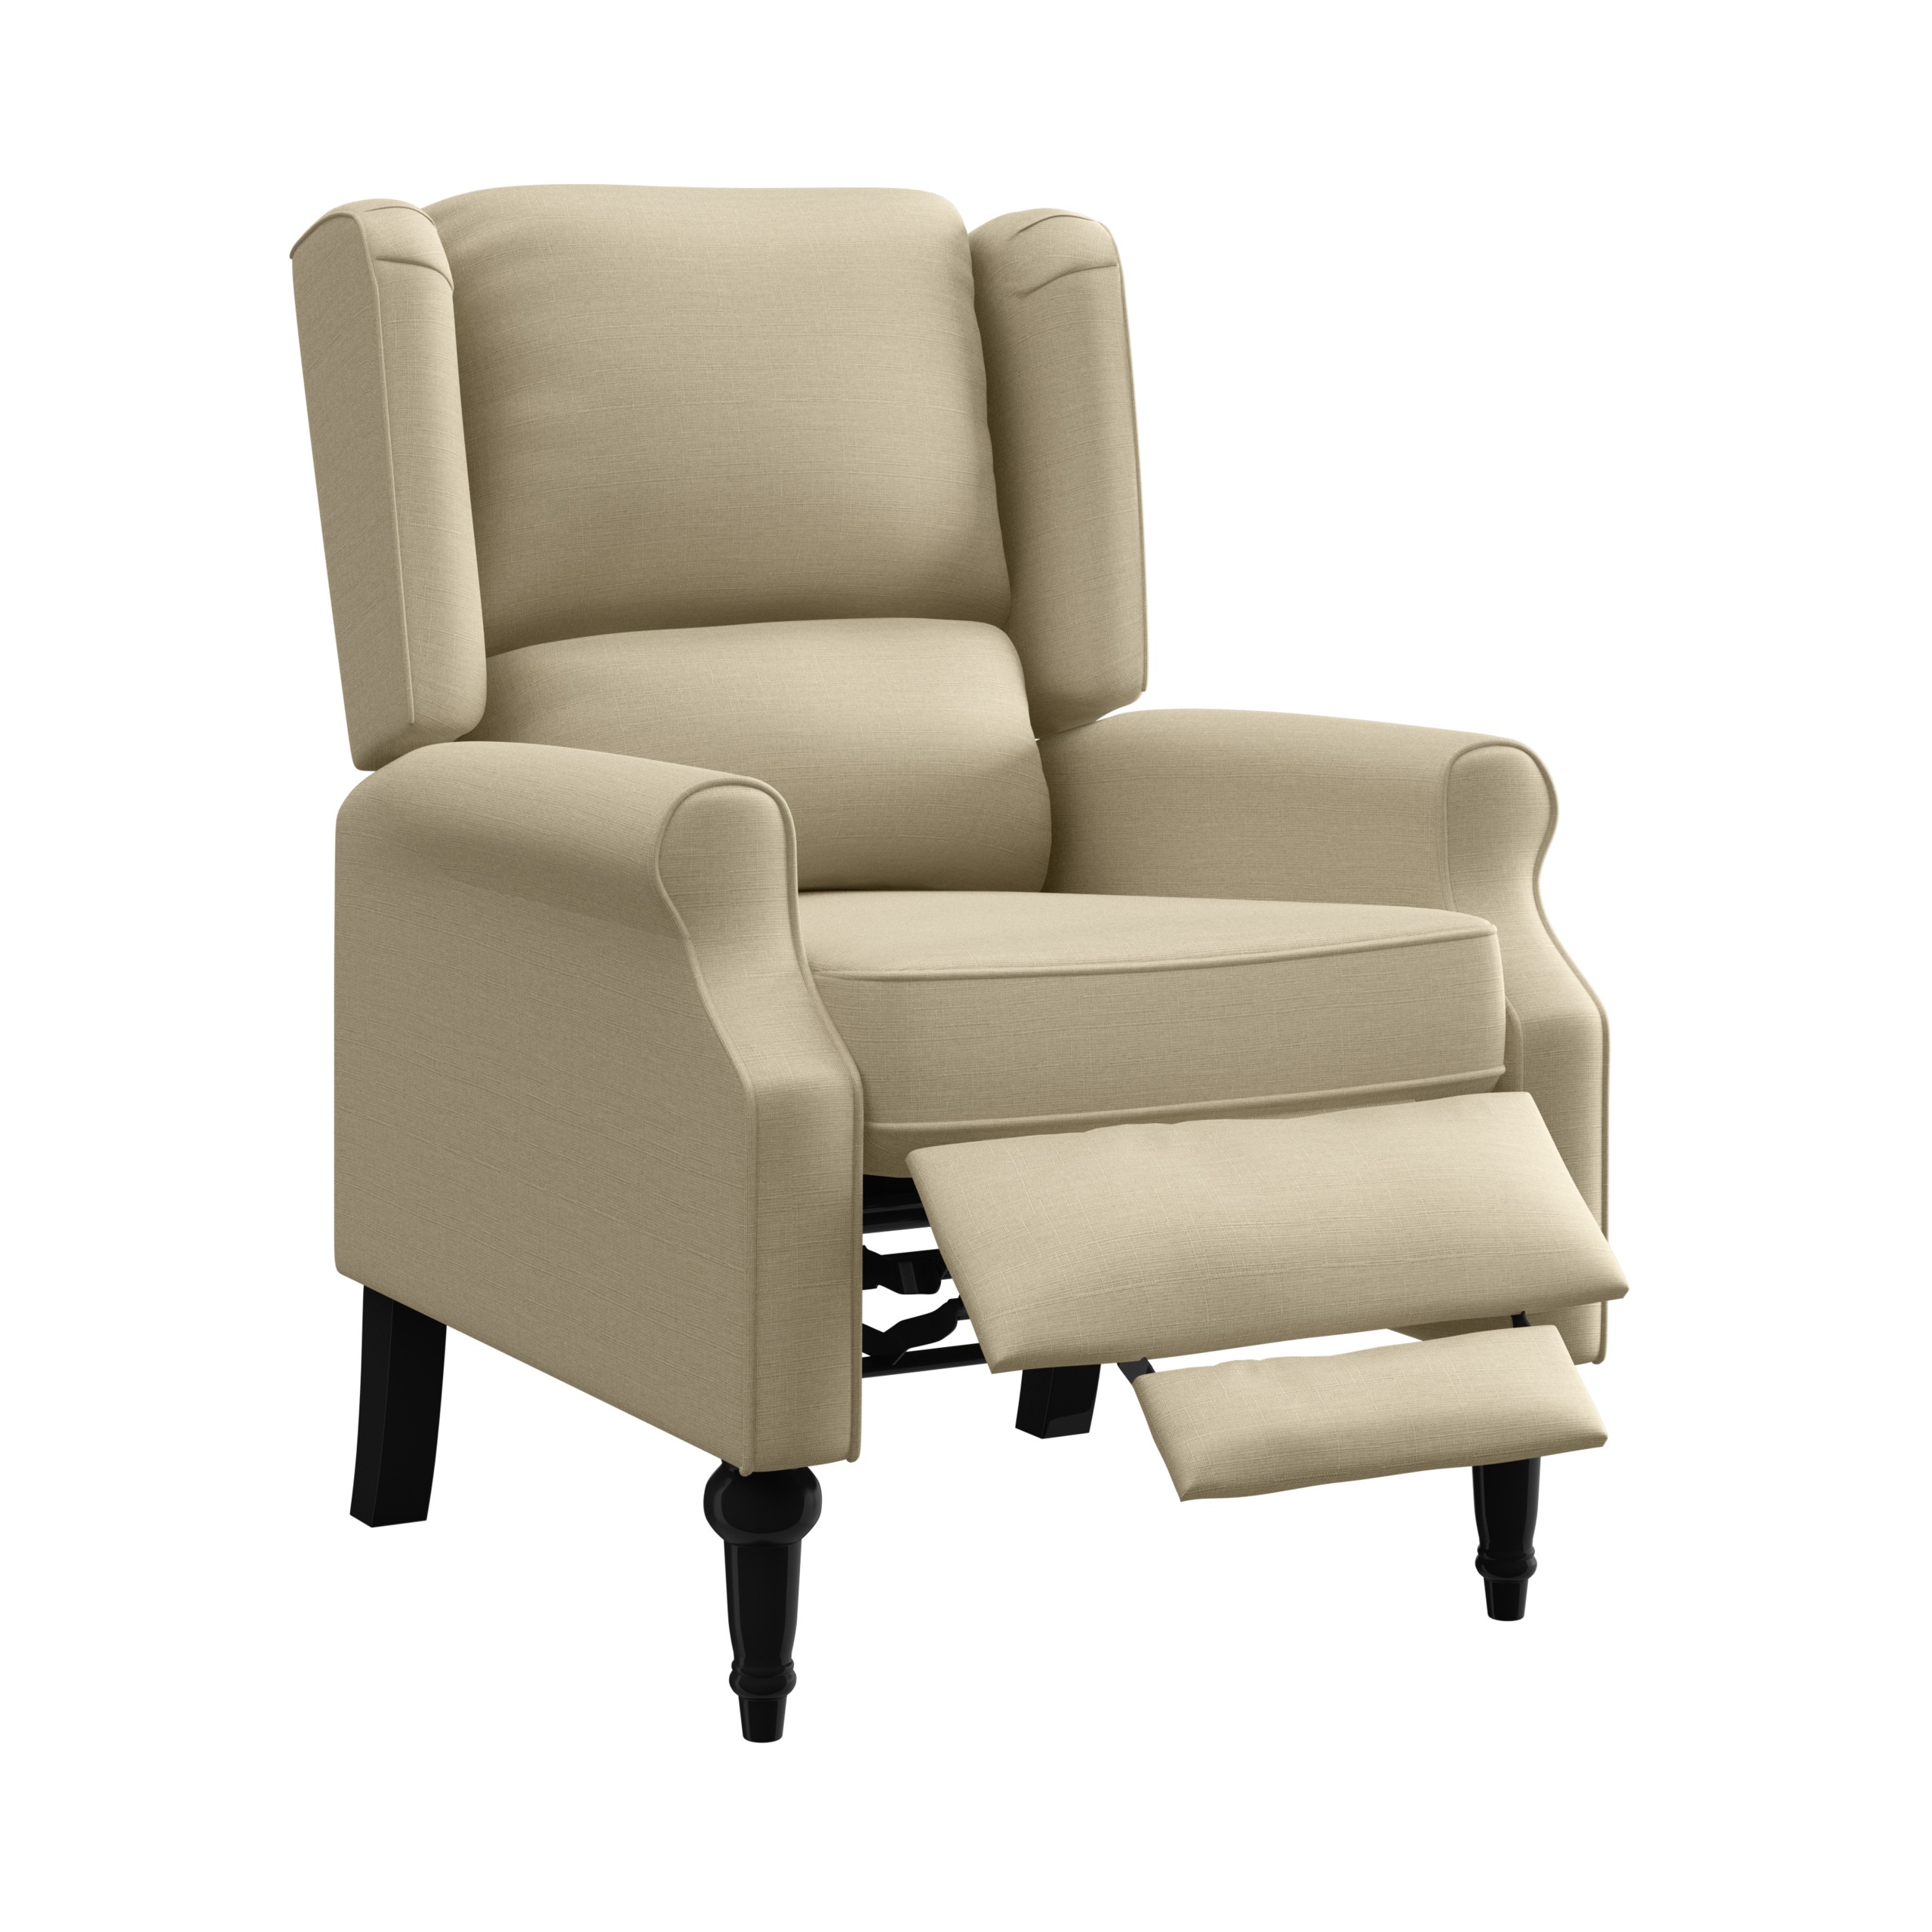 Homesvale alanna wingback pushback recliner in textured